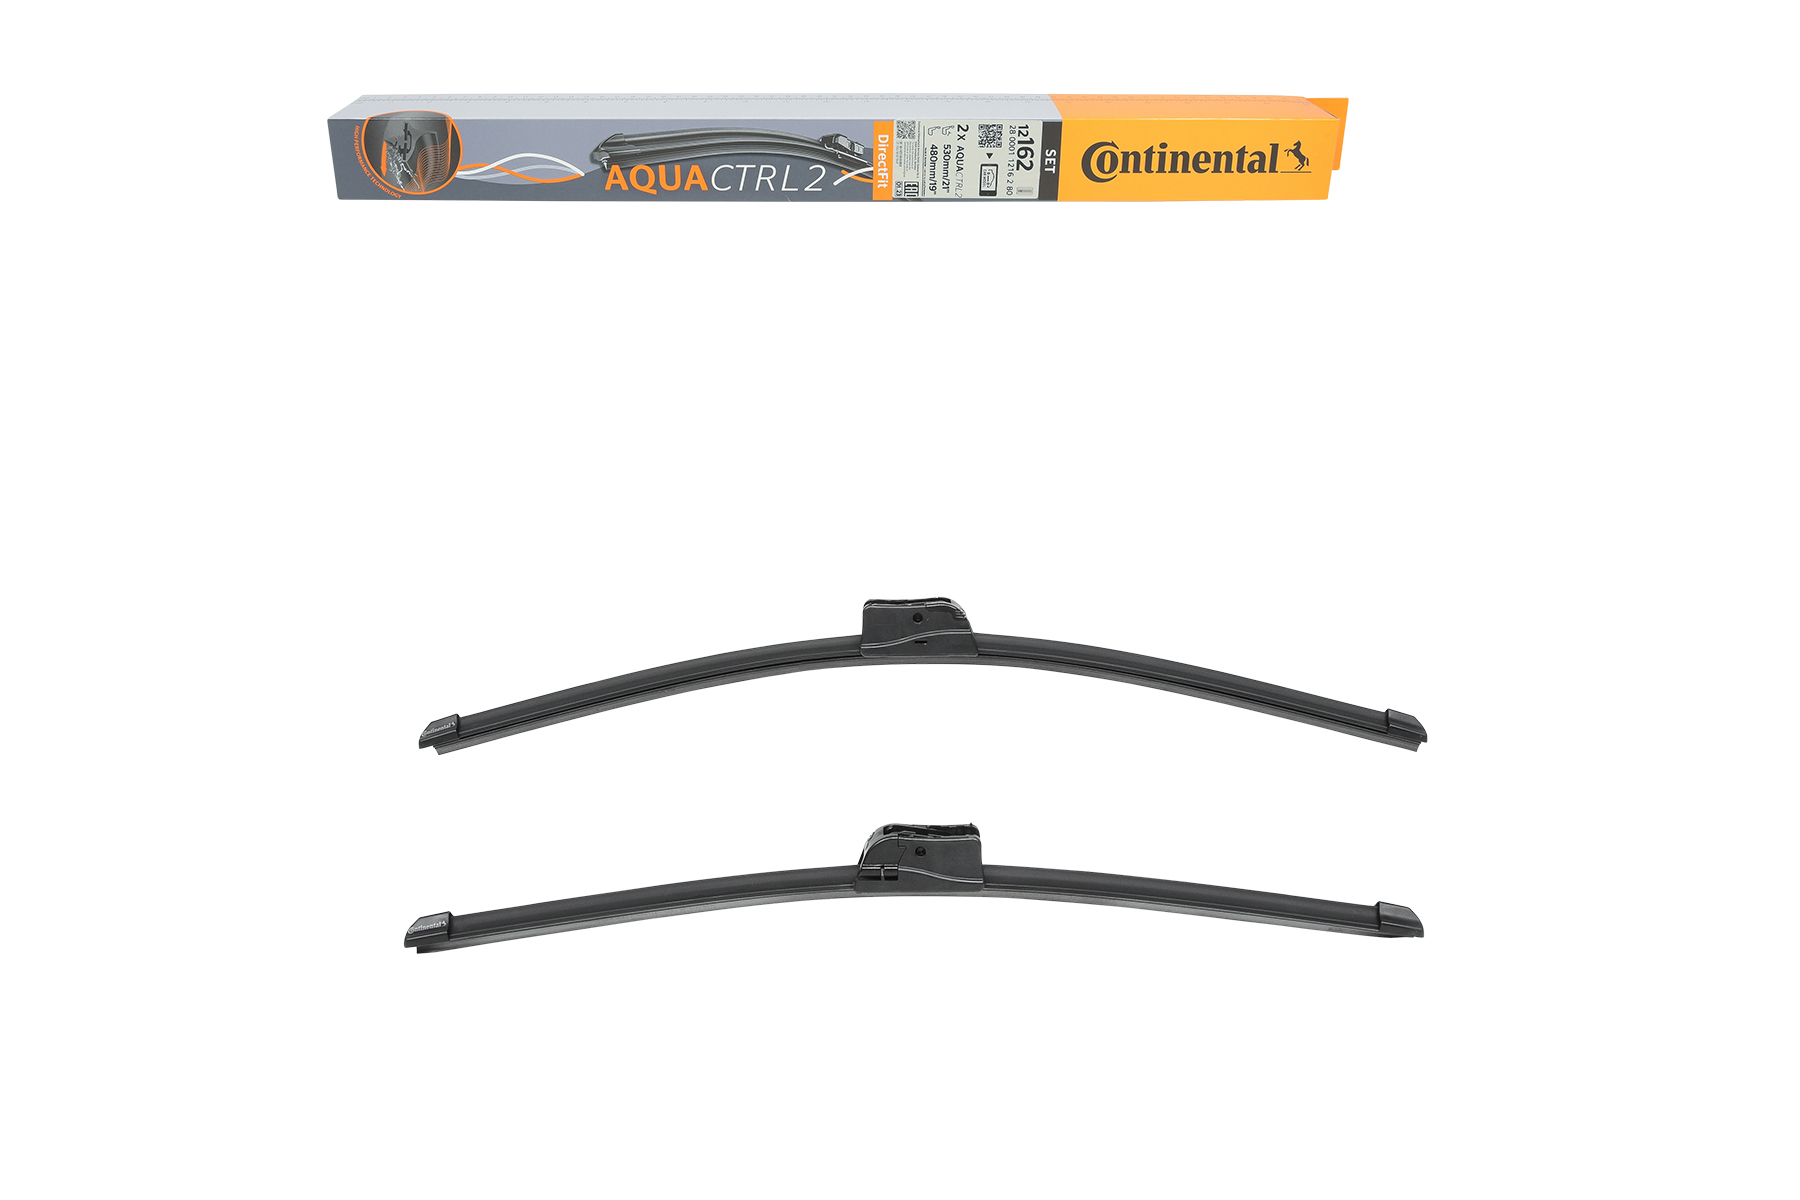 2800011216280 Continental Windscreen wipers KIA 530, 480 mm Front, Flat wiper blade, with spoiler, 21/19 Inch